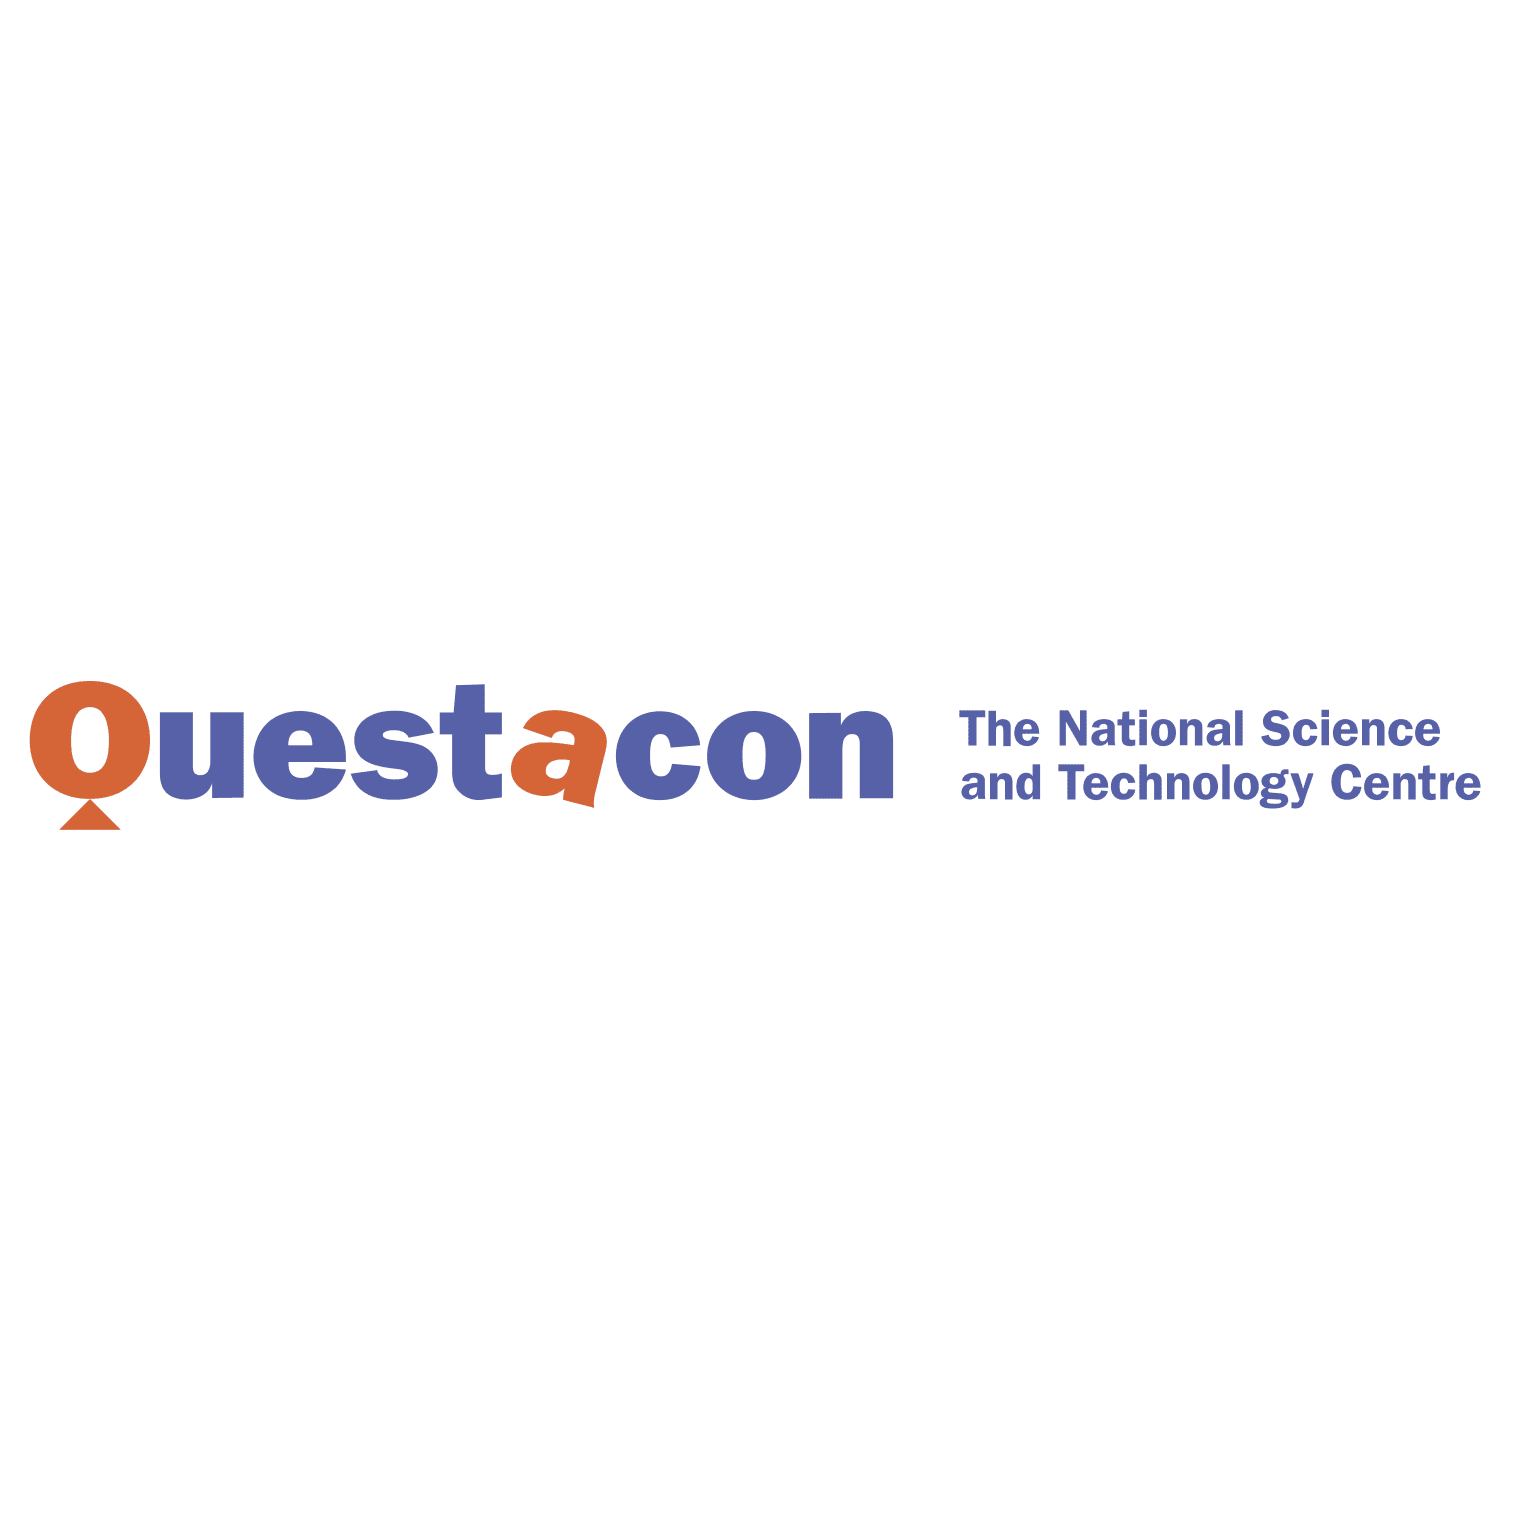 Questacon – The National Science and Technology Centre